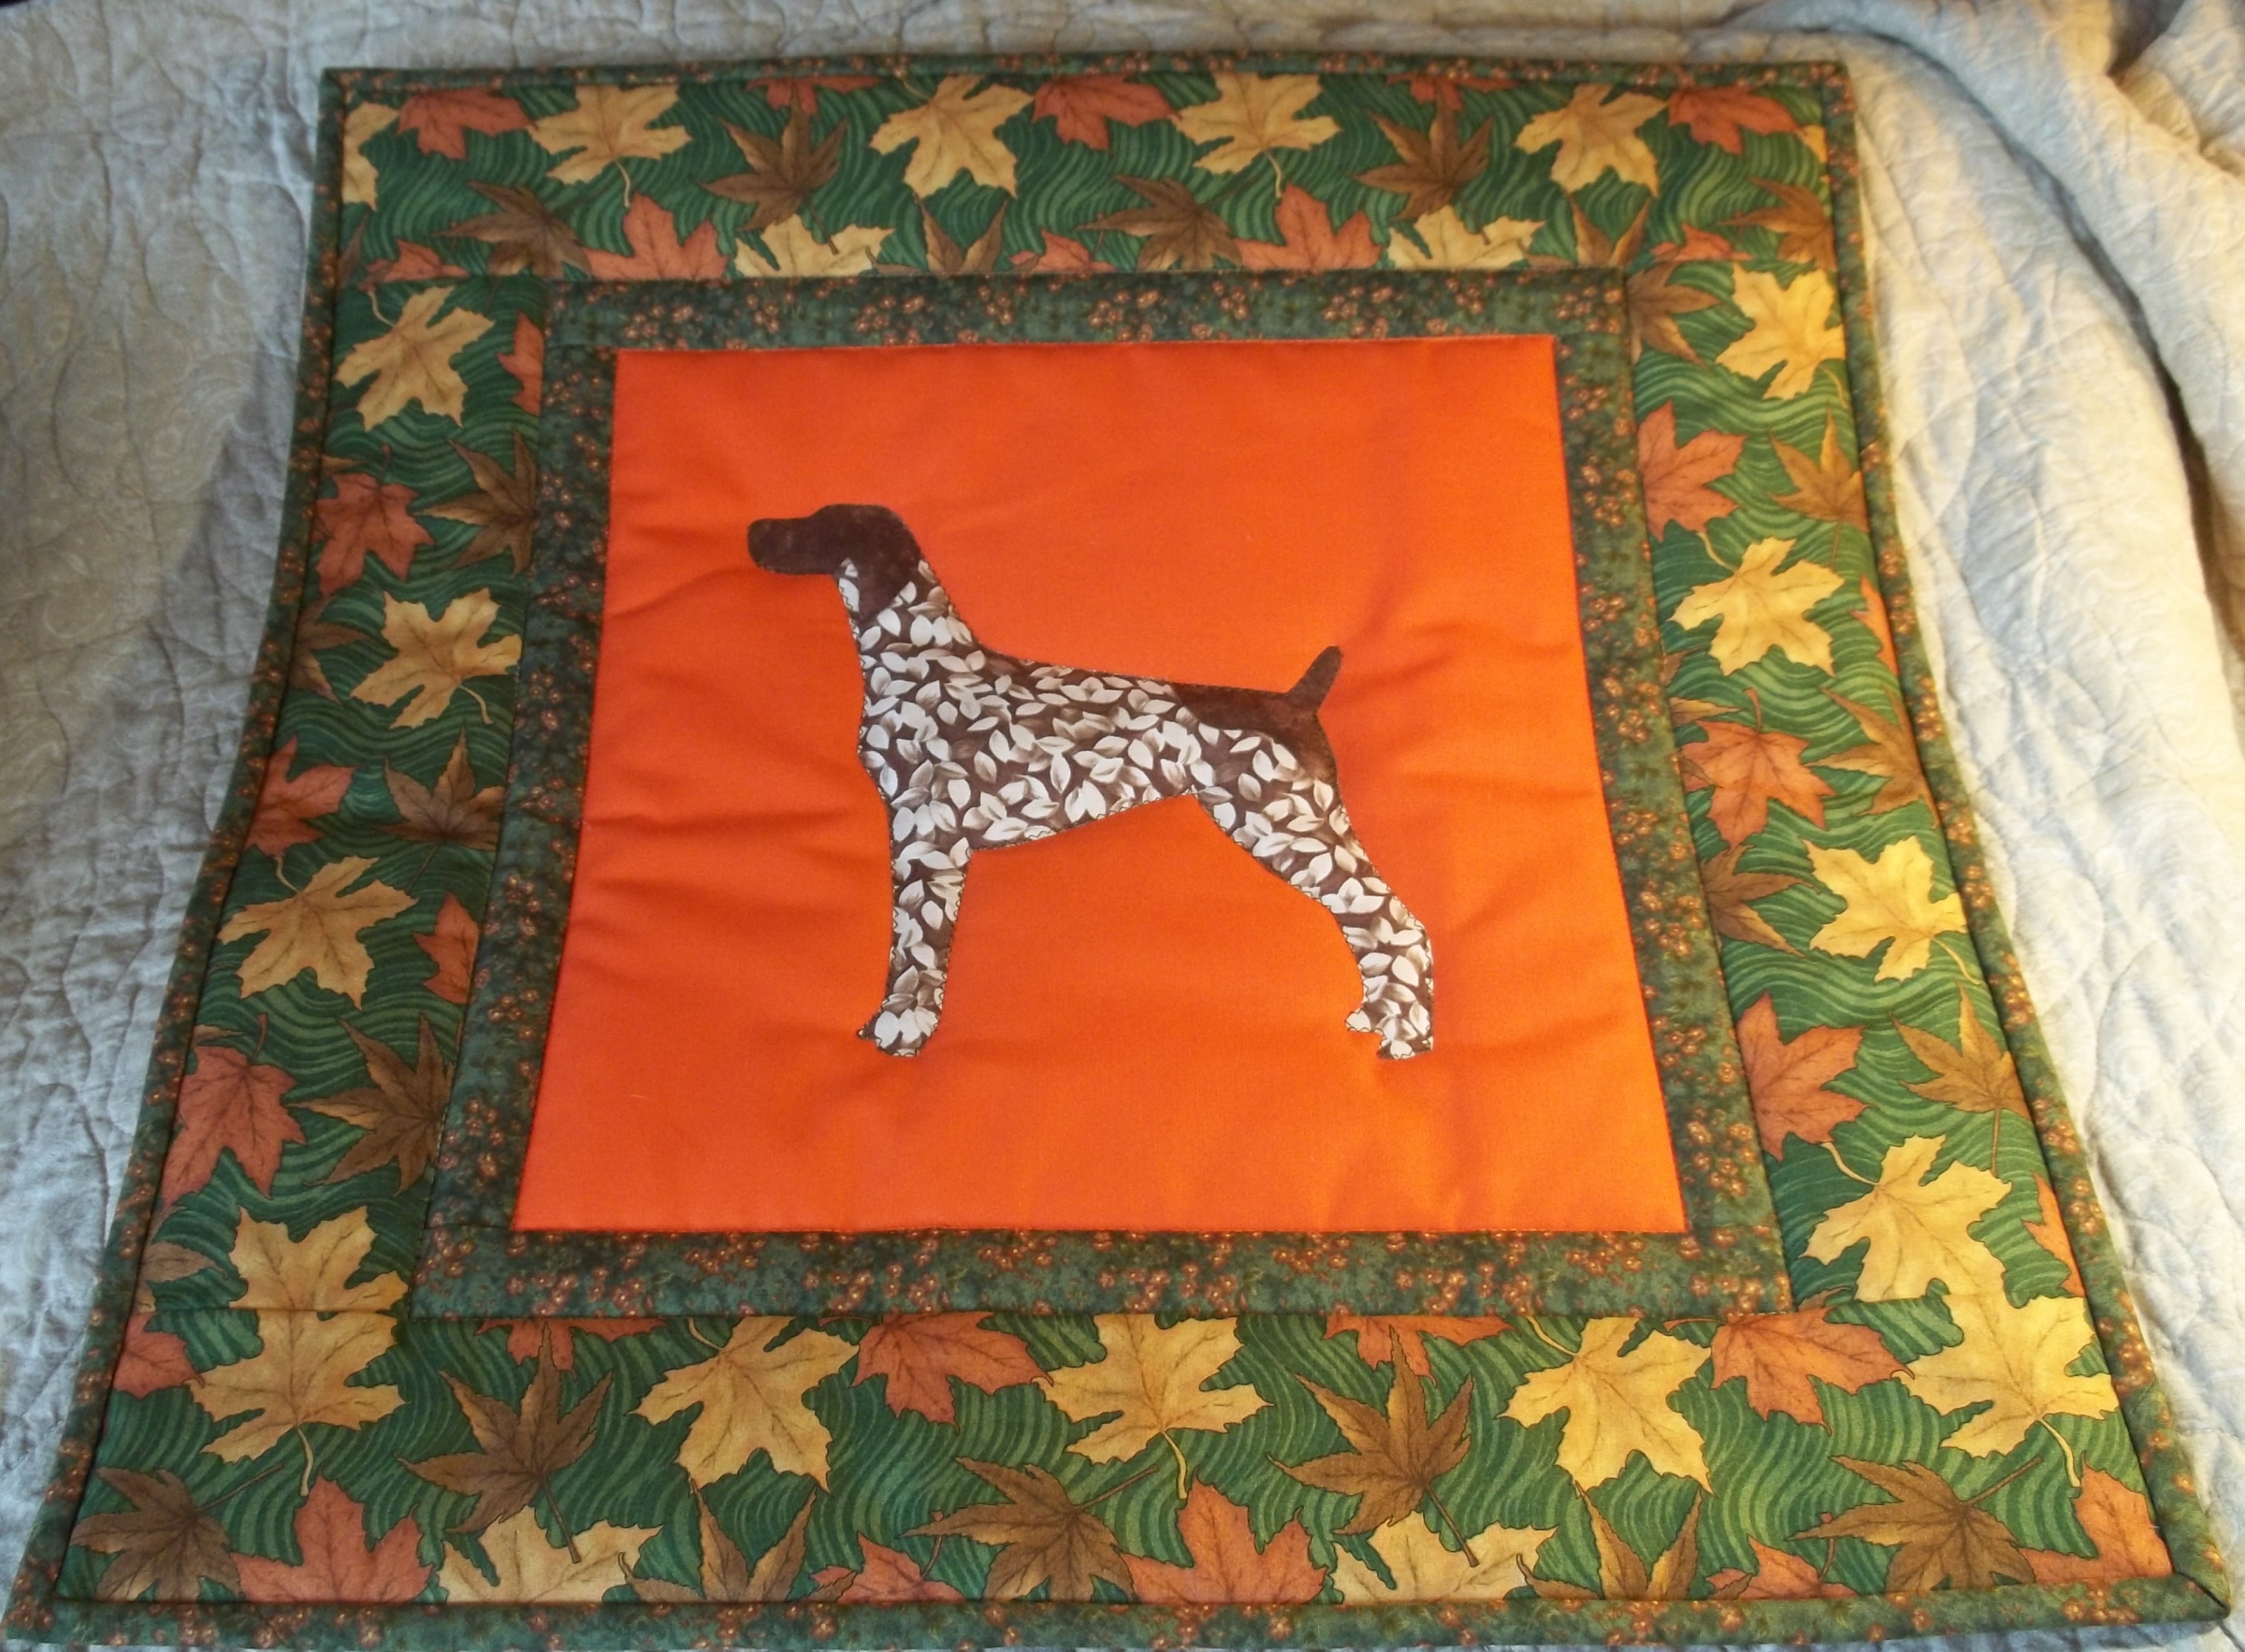 German Shorthaired Pointer Wall Hanging - Quiltingboard Forums